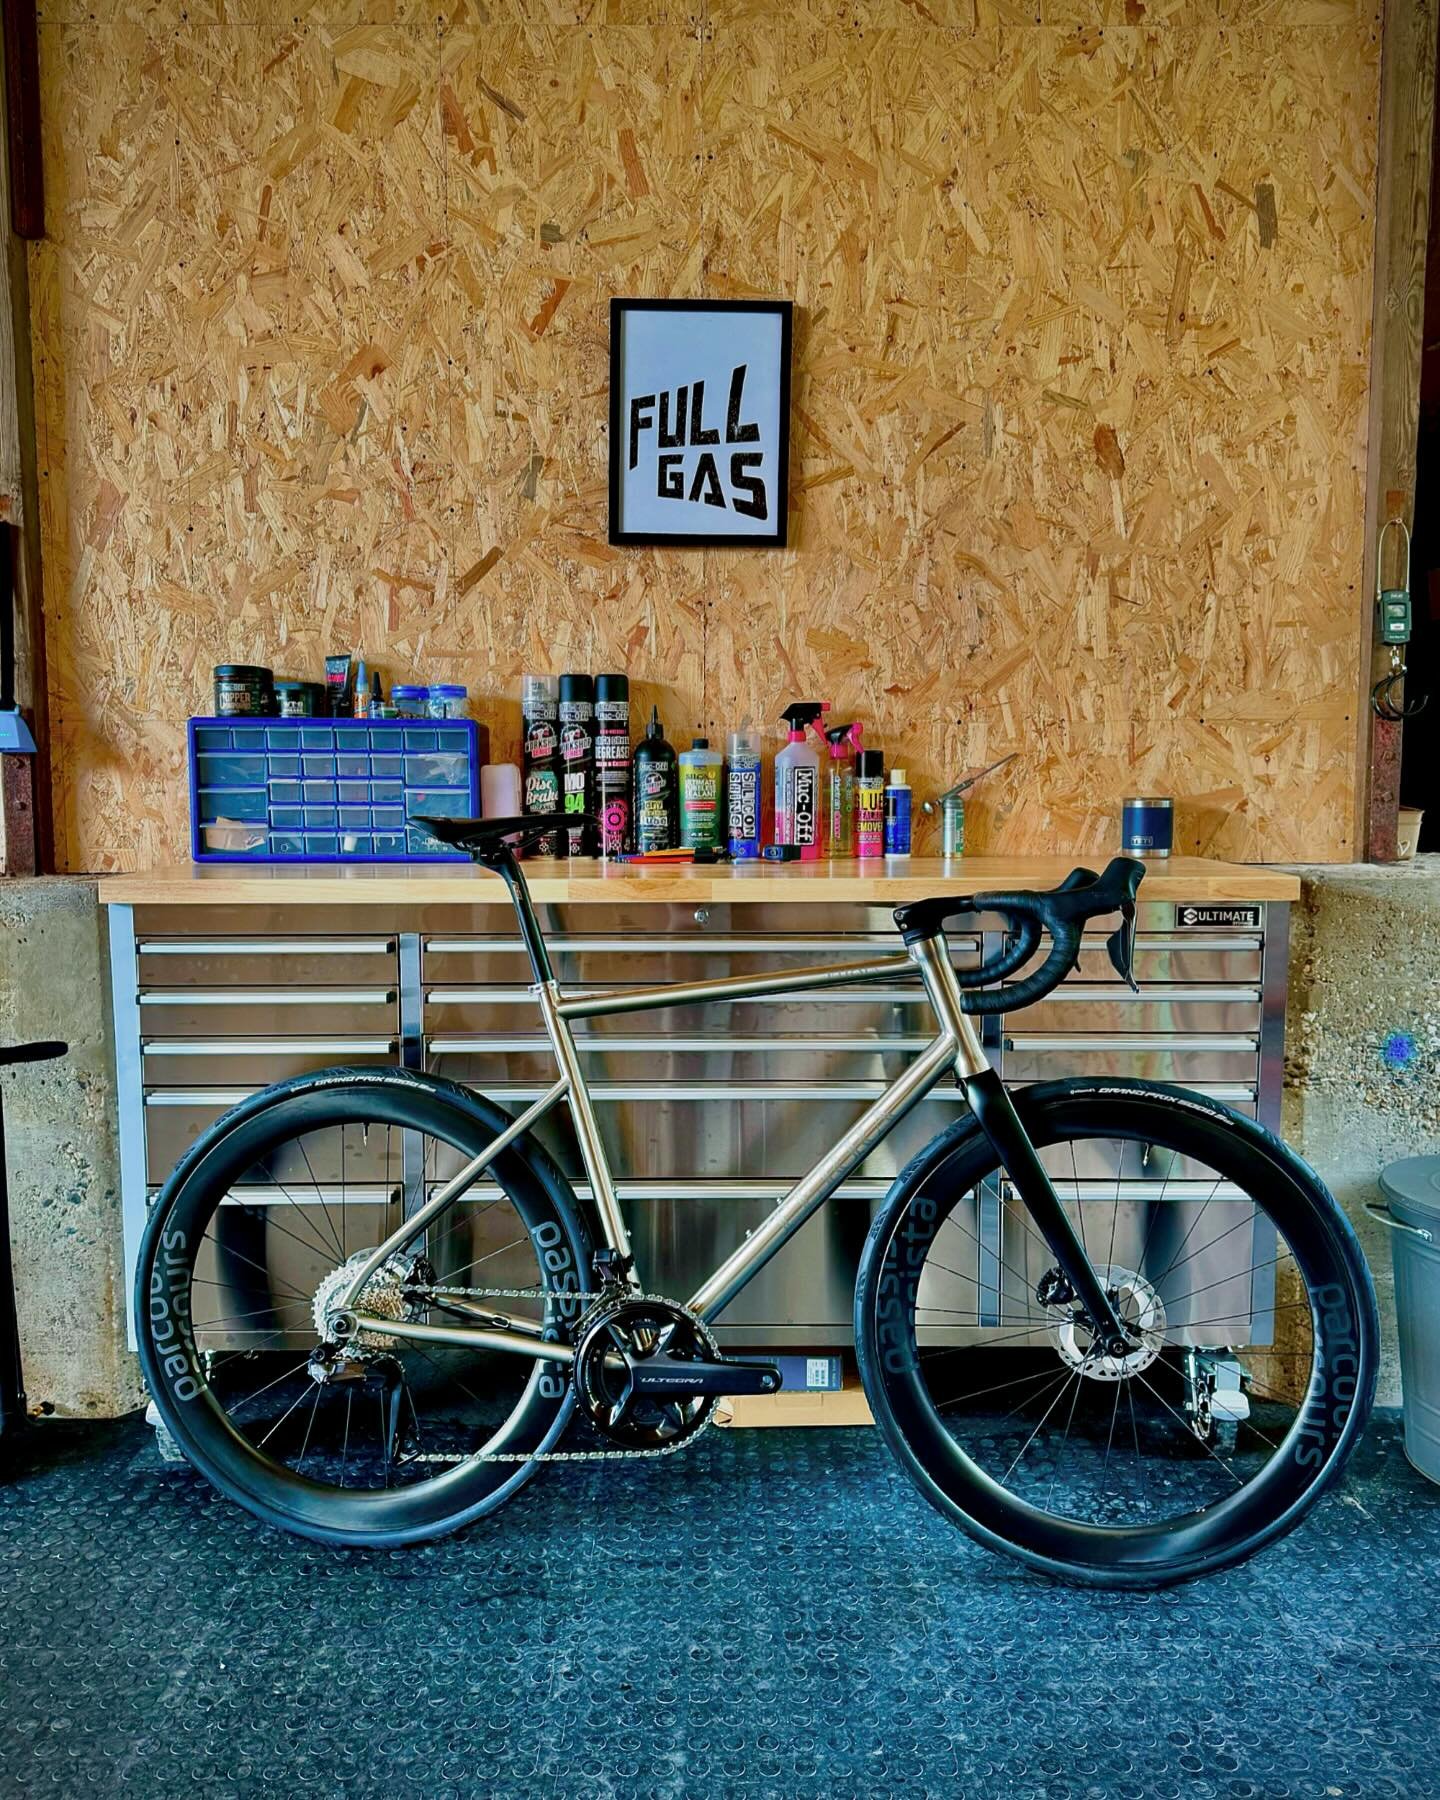 First build in the new HQ. It was a delight to build this Firma in our new workshop and hand it over to Steve in what will become the showroom and fit studio, 

Steve was looking for a no compromise 4 season bike and with the integrated handlebar, ca